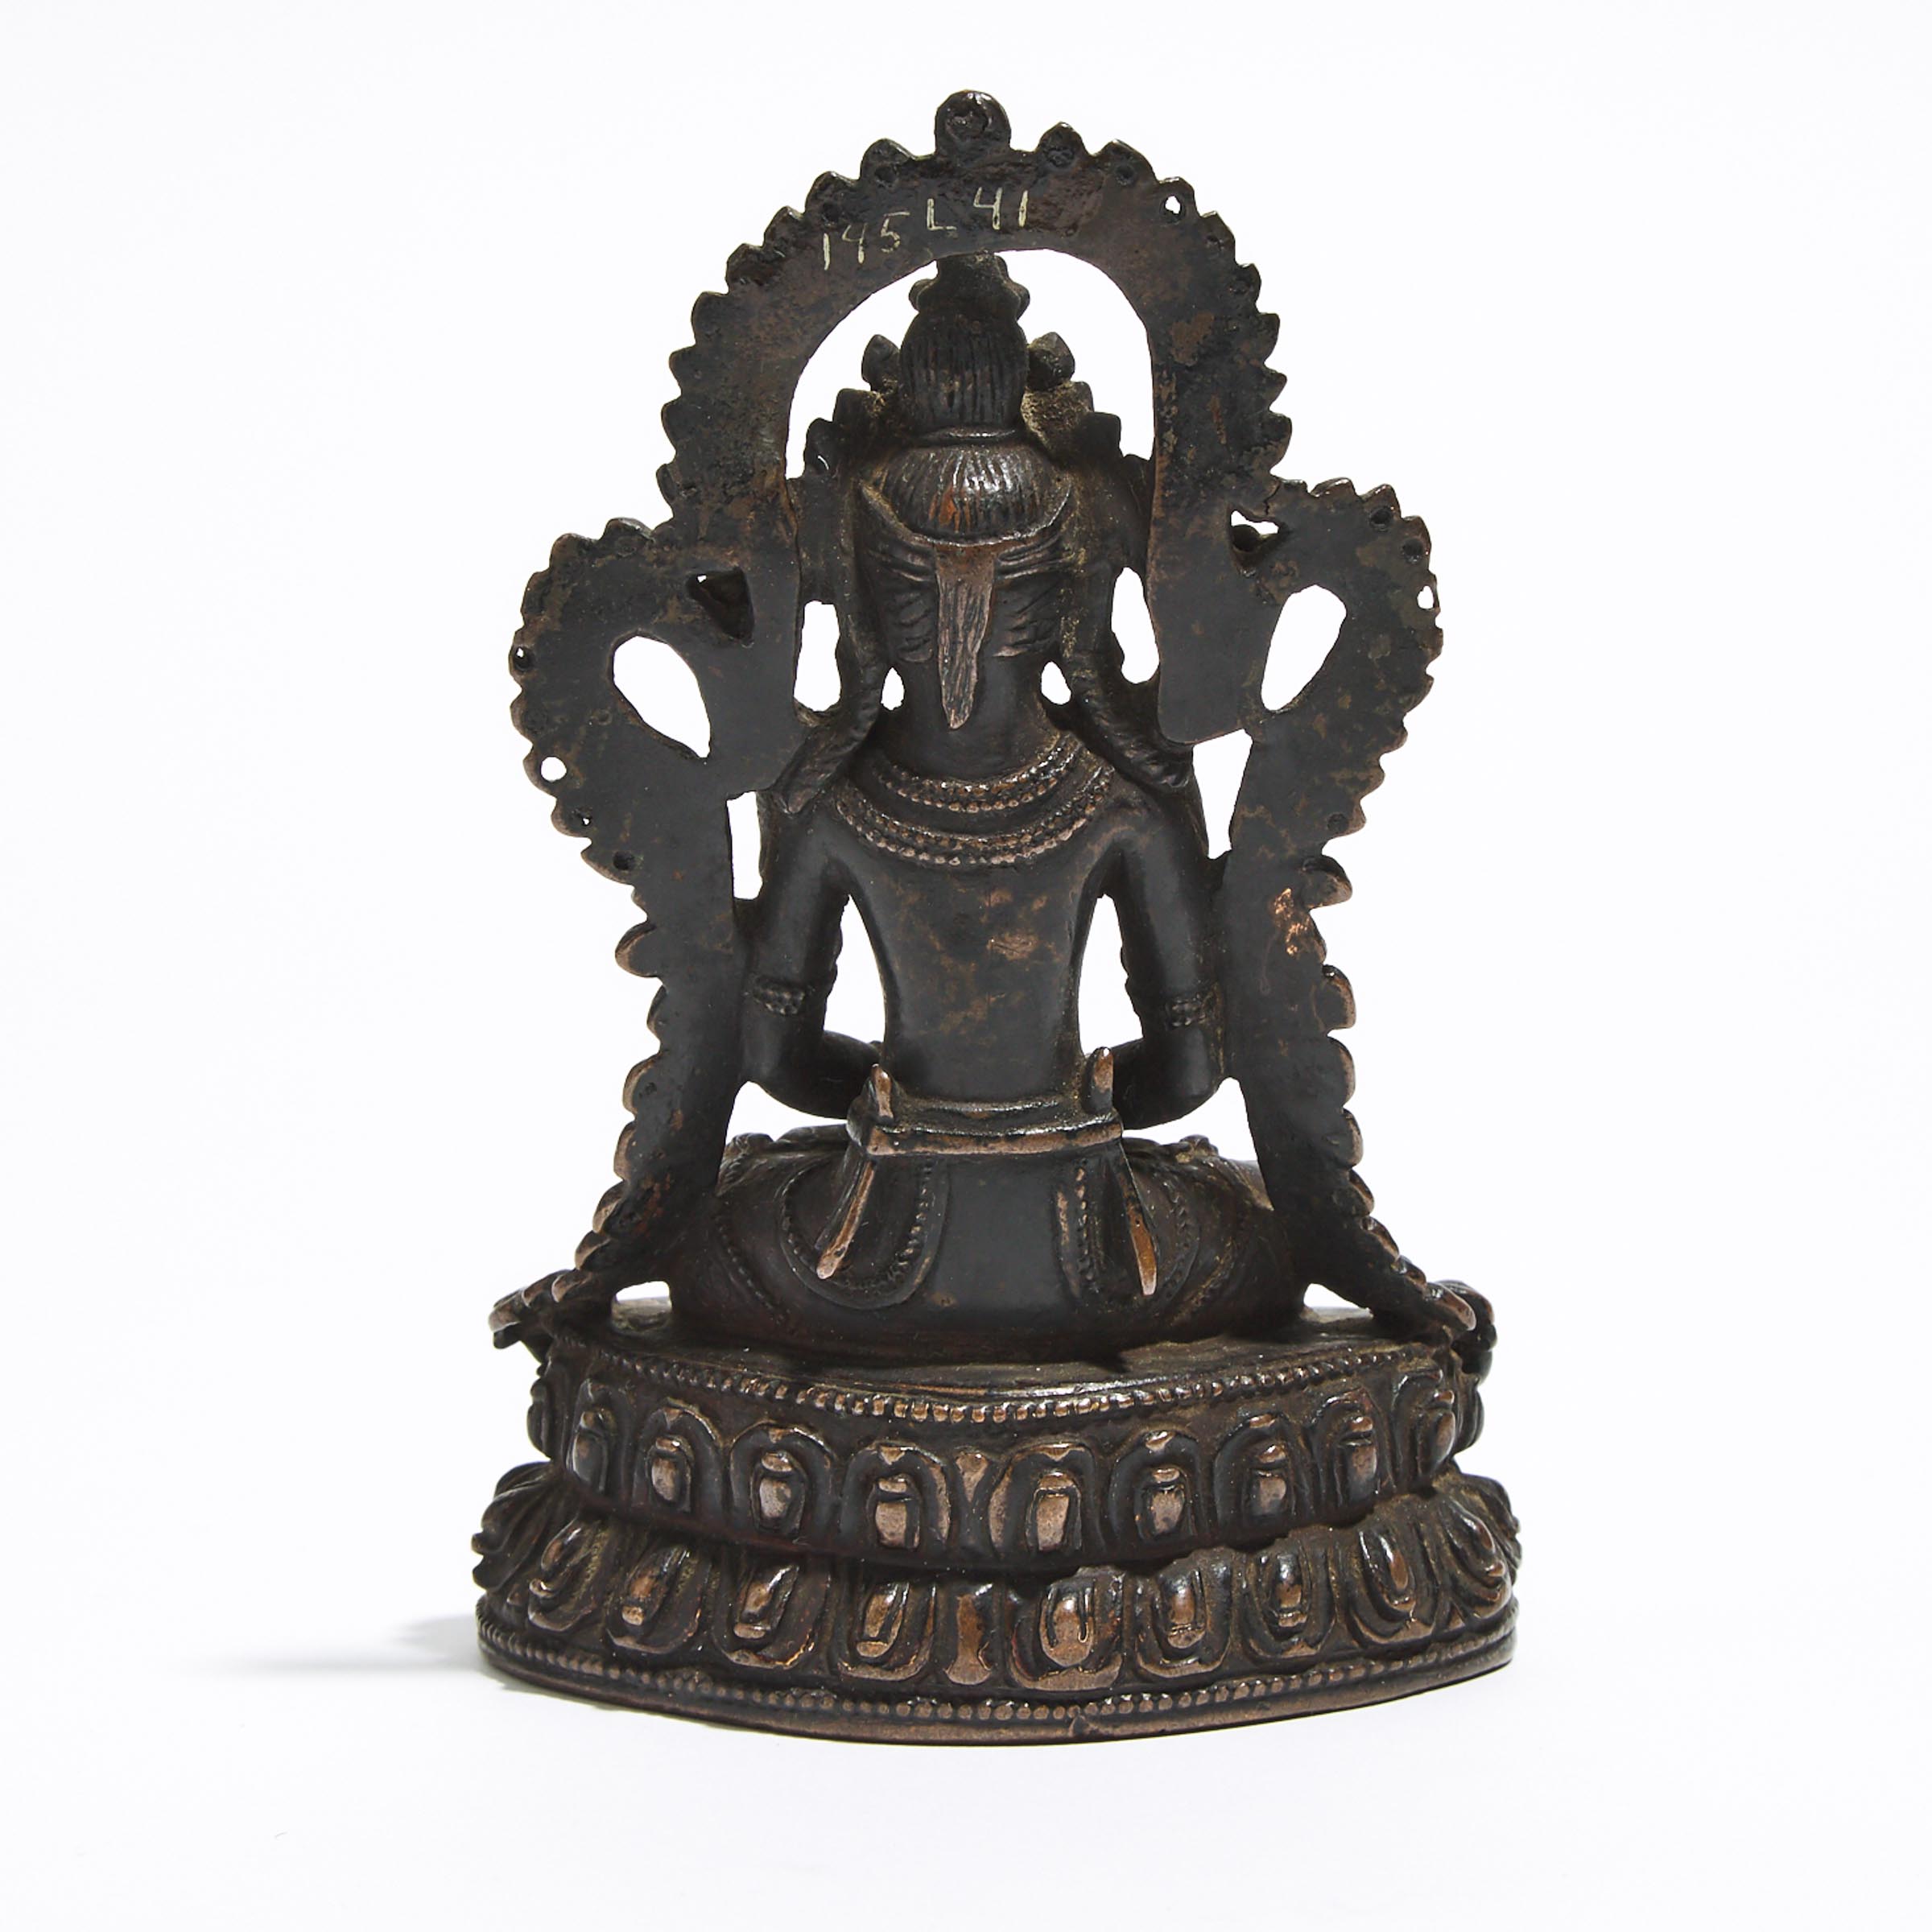 A Copper Alloy Figure of Medicine Buddha, Tibet, 14th Century or Later